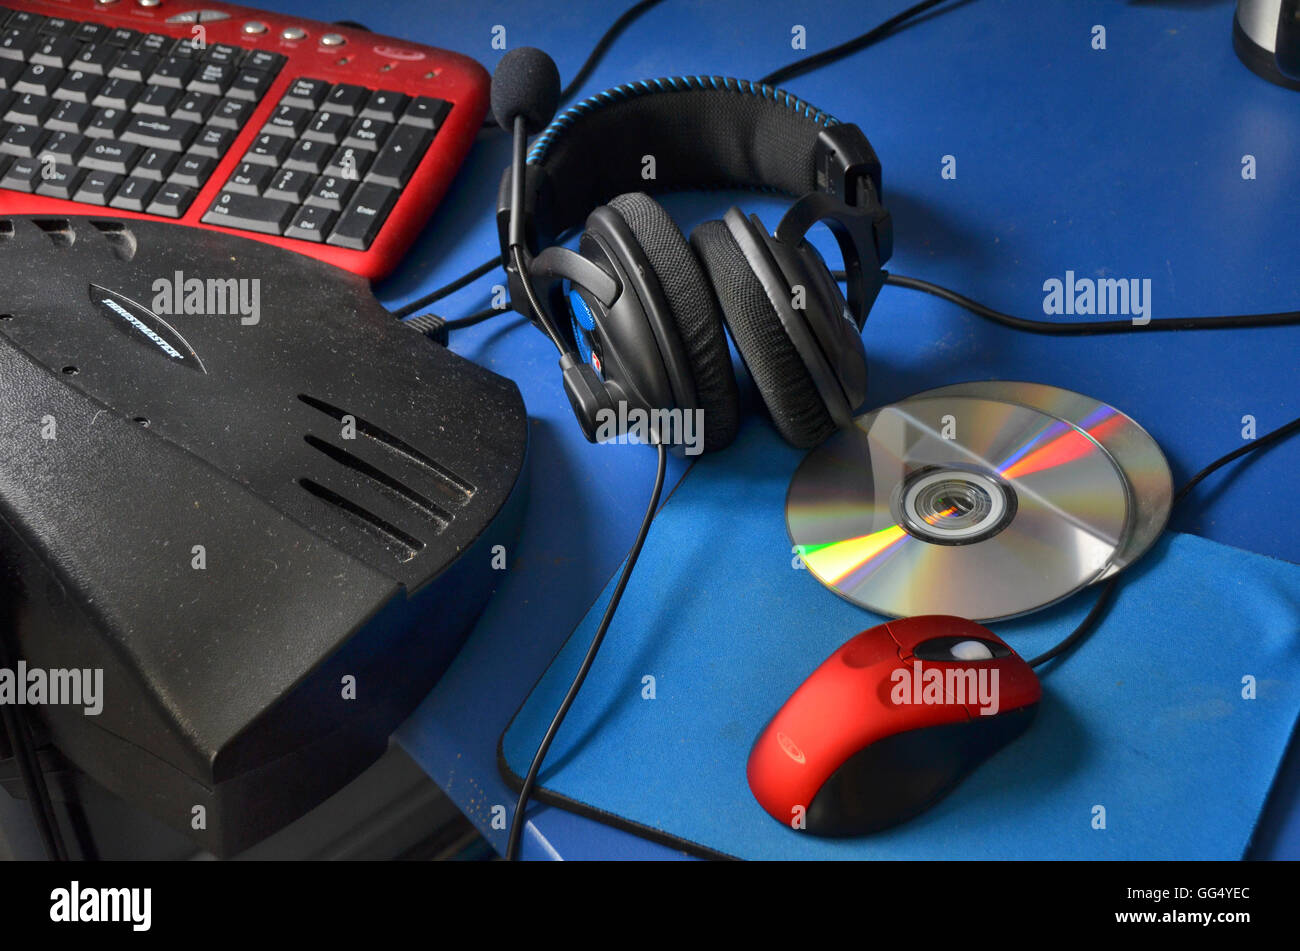 Computer Headphones, DVDs, red scroll mouse and mat and keyboard sit on a blue topped office desk. Stock Photo